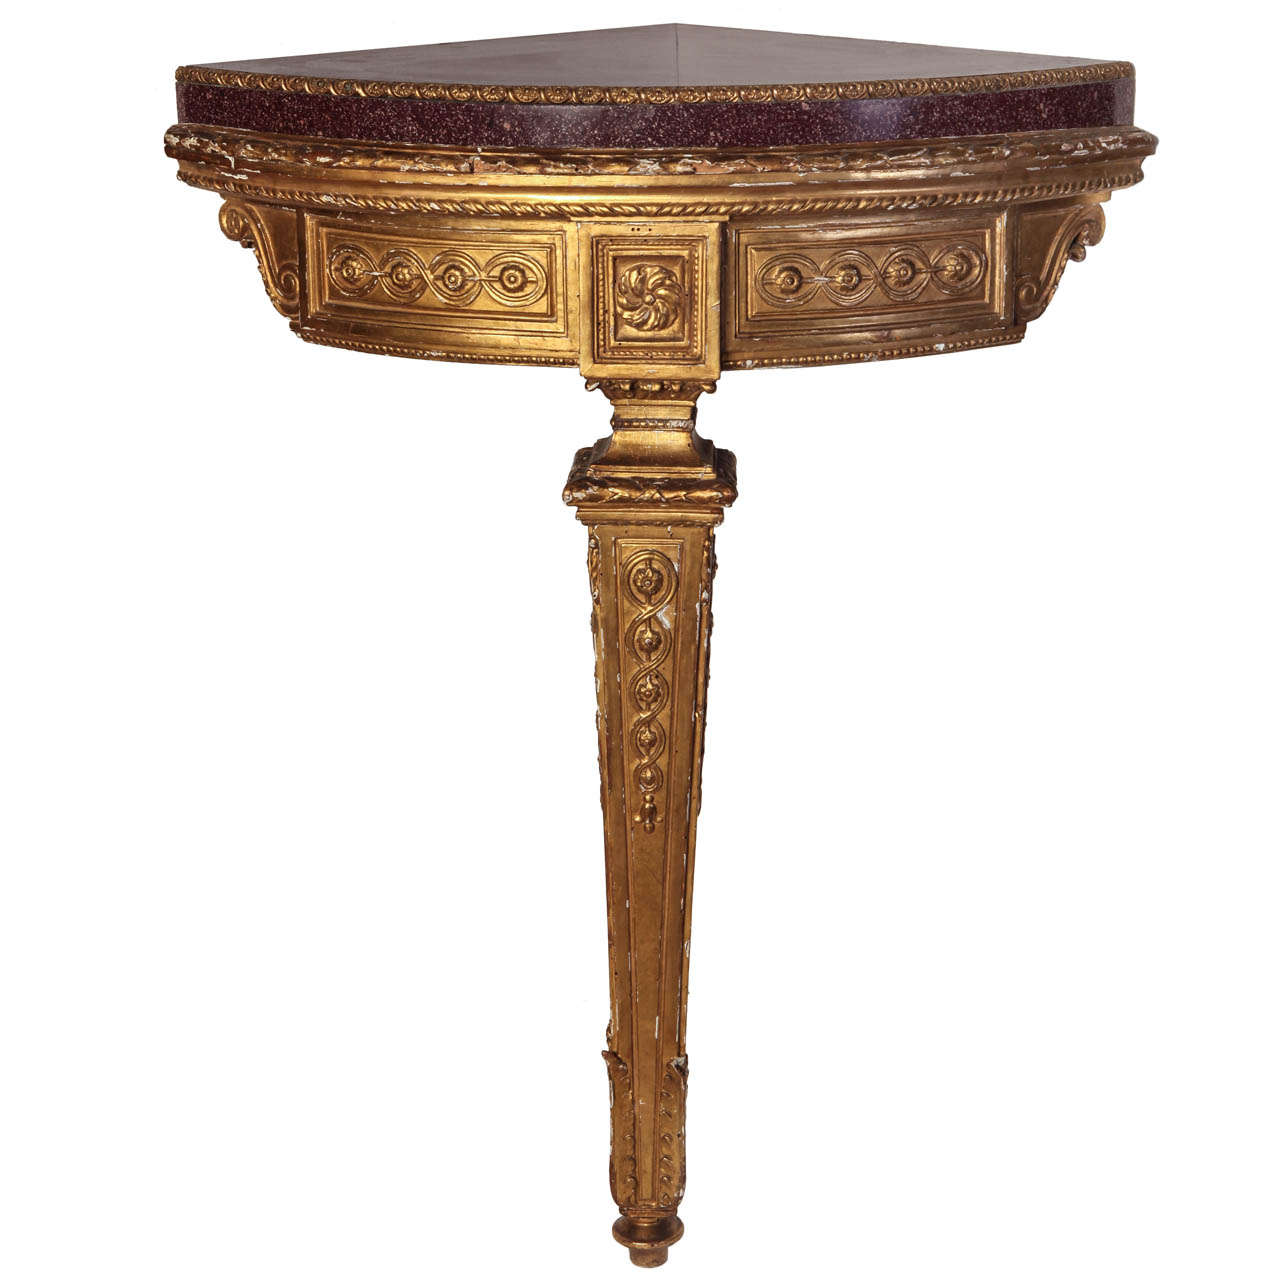 A Fine Pair of 18th Century North Italian Encoignures with Porphyry Marble Top For Sale